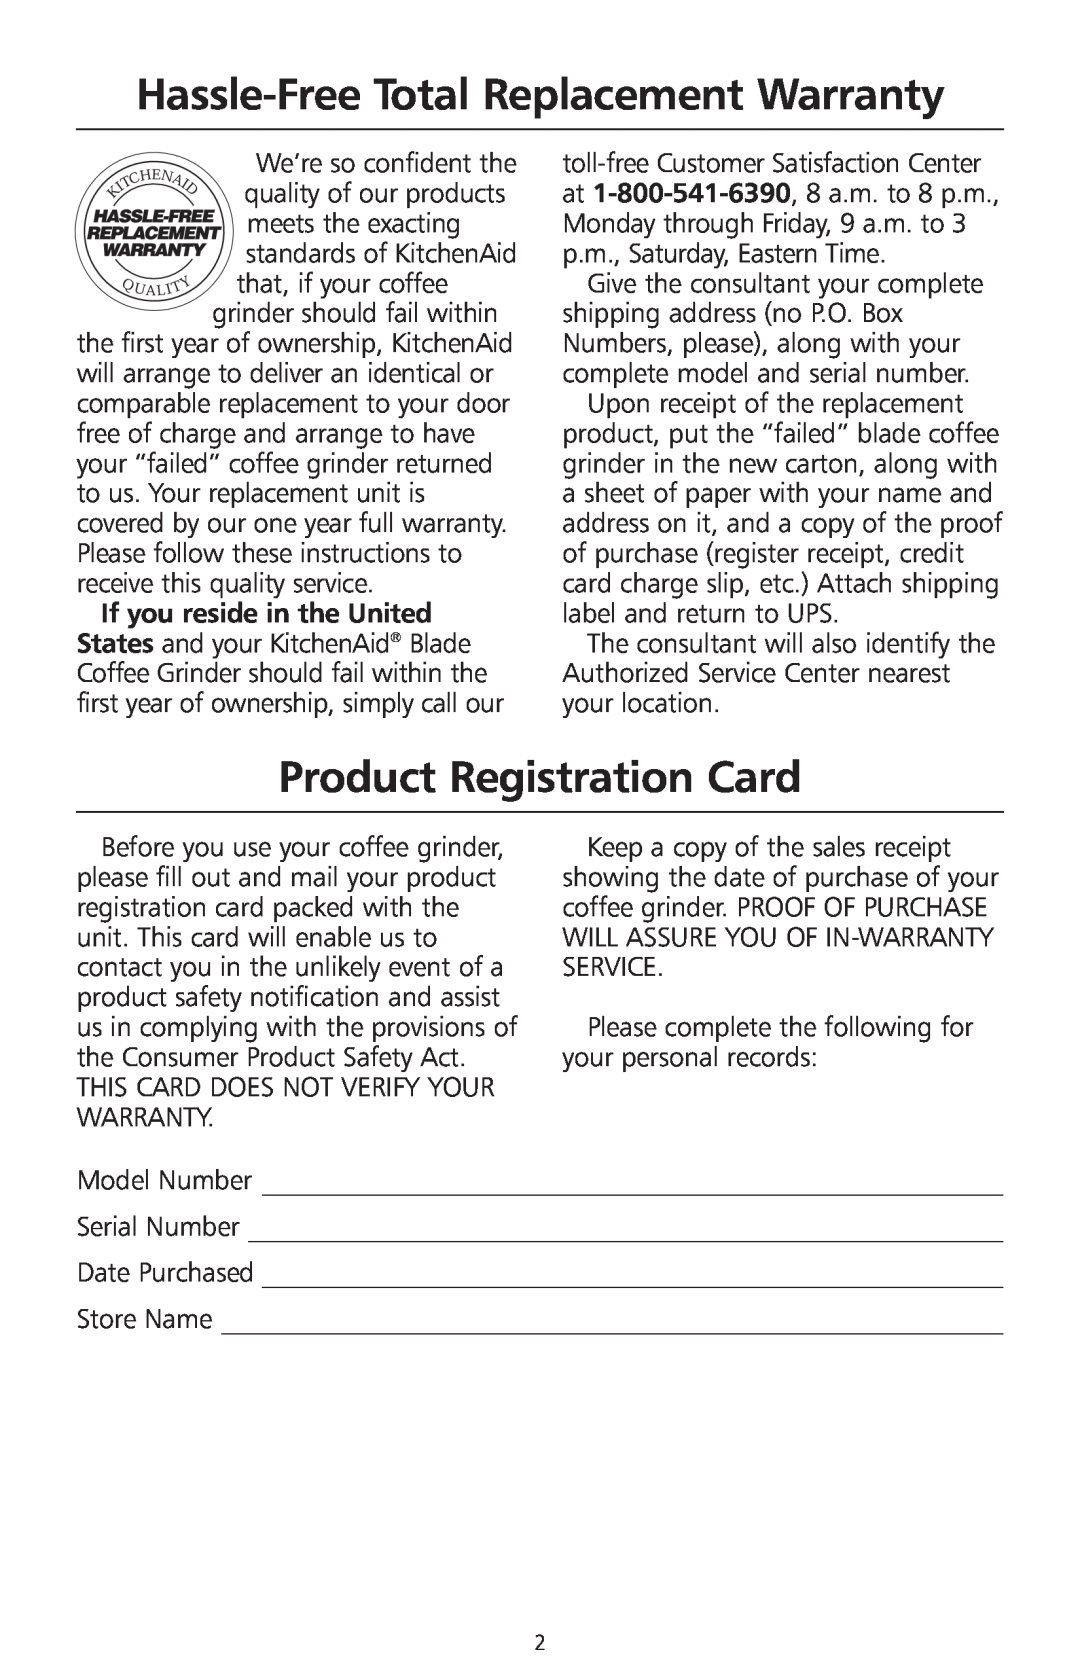 KitchenAid 2633 manual Hassle-Free Total Replacement Warranty, Product Registration Card 